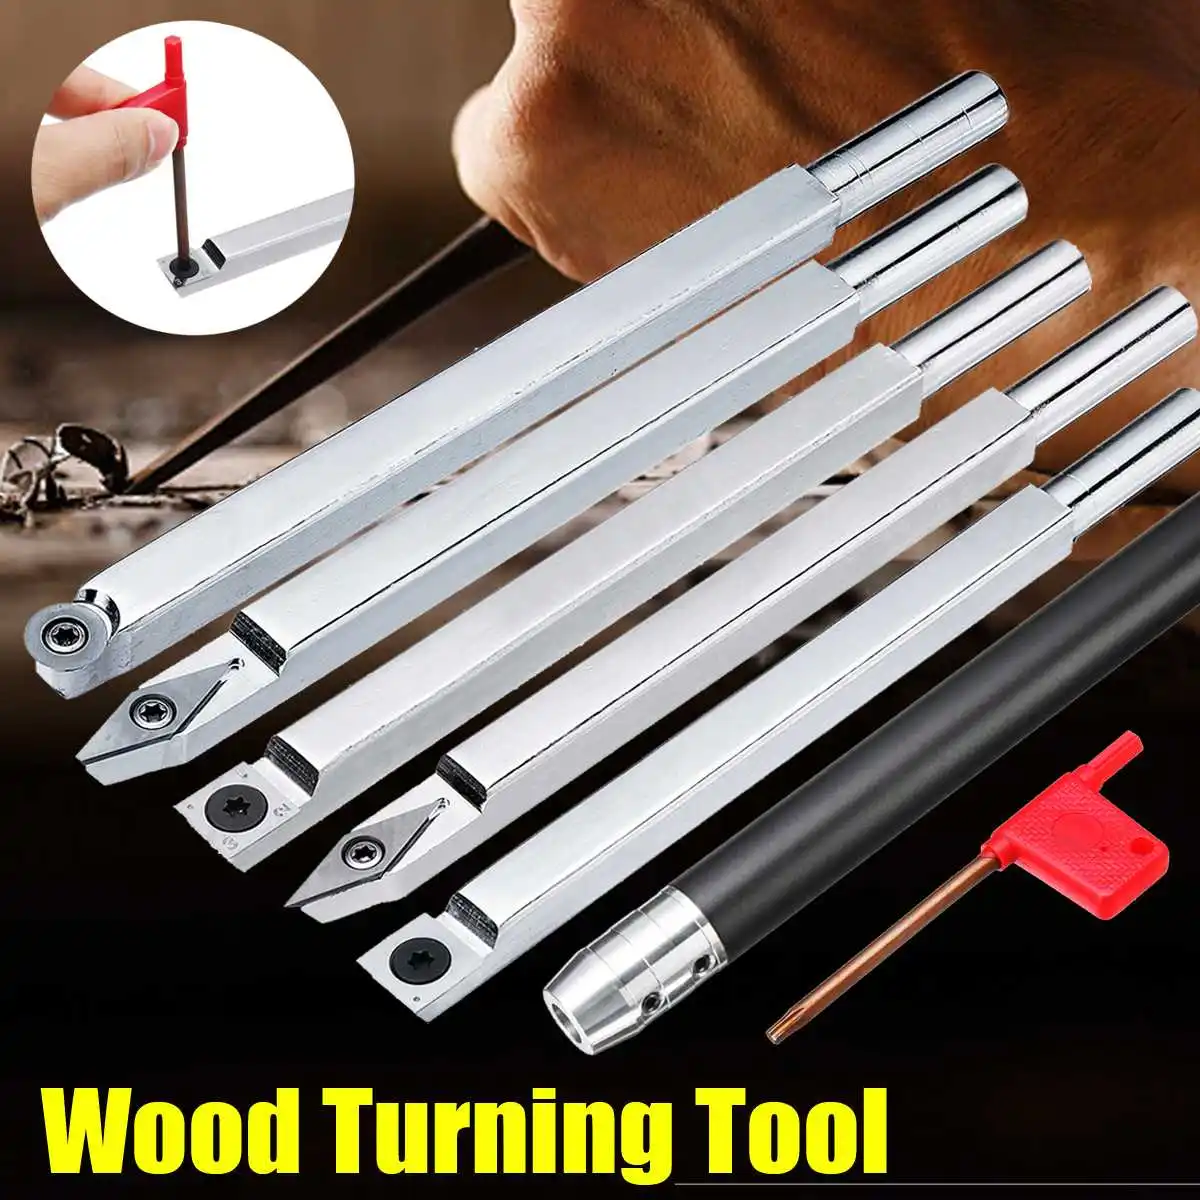 Wood Turning Tool Chisel Changeable Tungsten Carbide Tip Lathe Tool Insert Cutter Can Match Alloy Steel Woodworking Tool Turning Tool Aliexpress